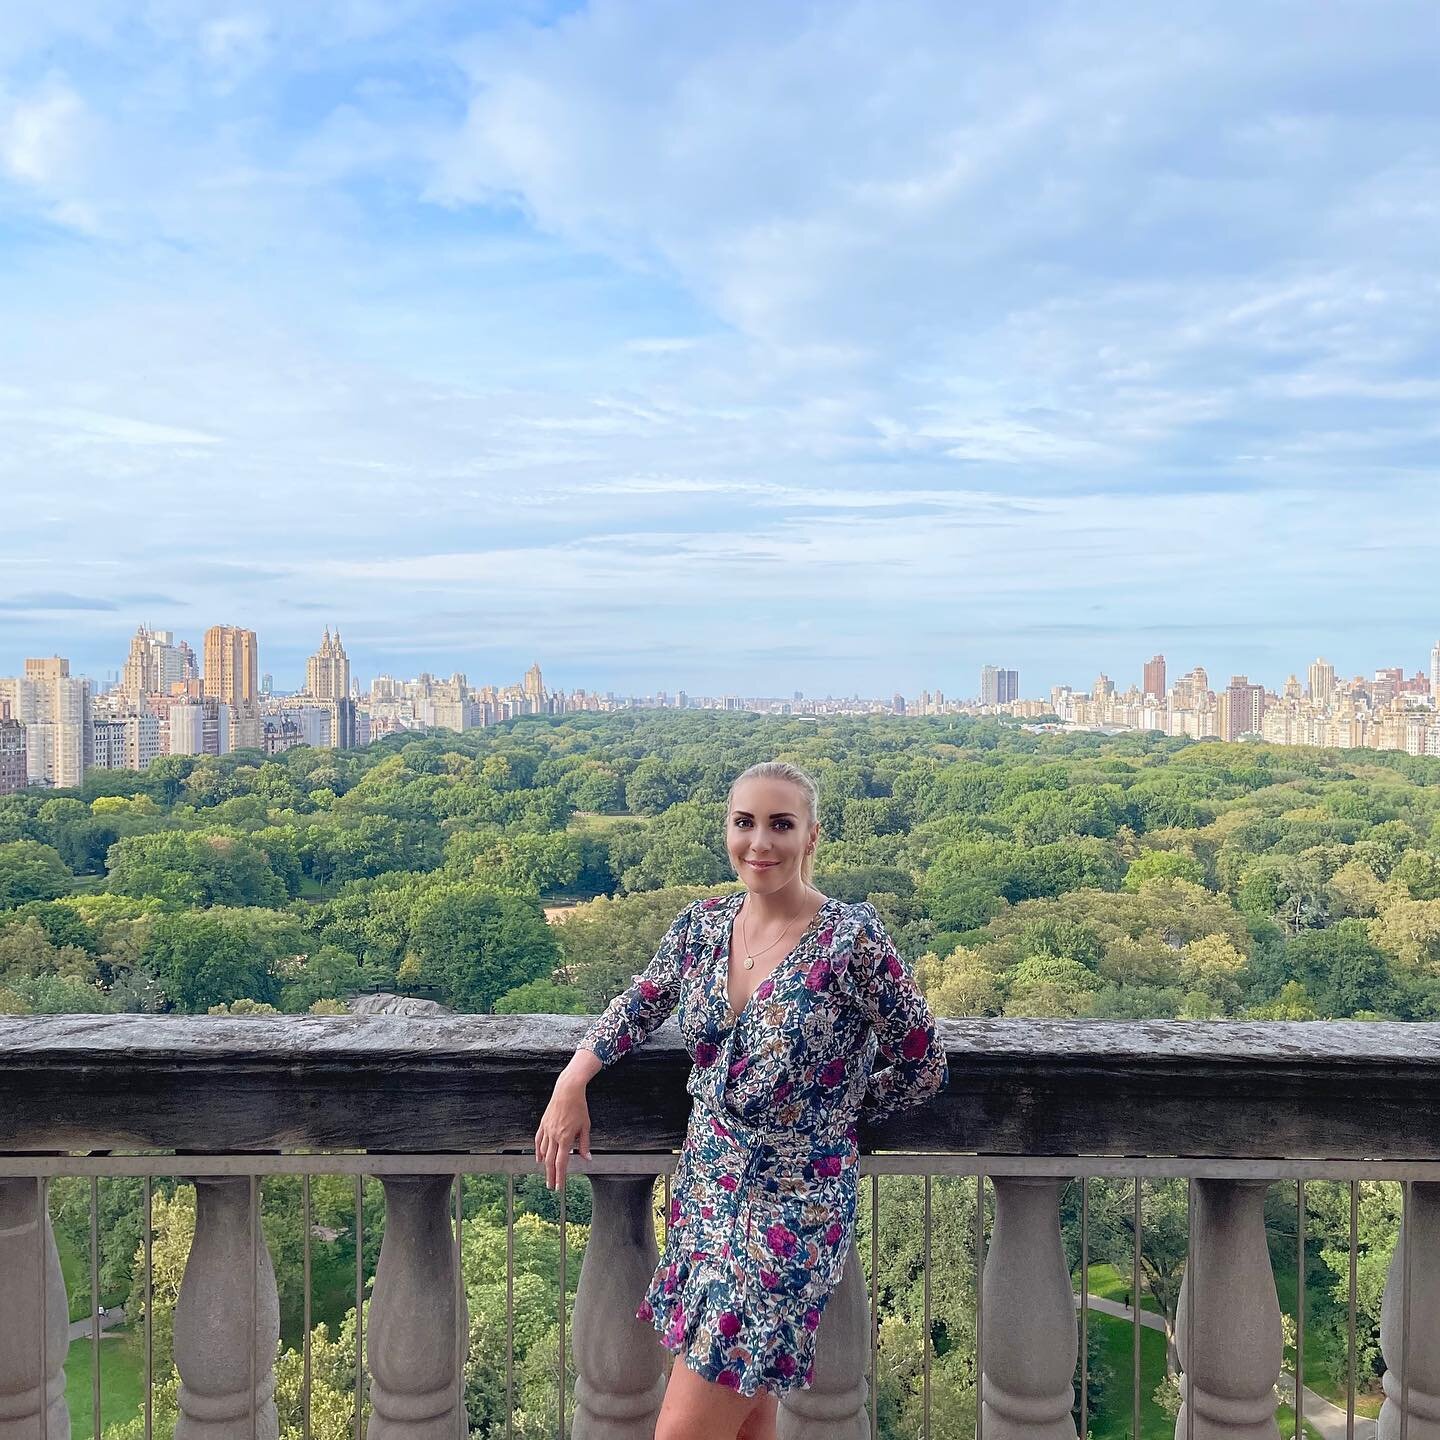 So happy to be back in NYC&mdash;- I have missed the city and it&rsquo;s energy with my whole ❤️ and while she feels a bit more quiet her heart is strong and I just know she will be back  #nystrong #ny #nyc #firstlove #centralpark #roomwithaview #gre